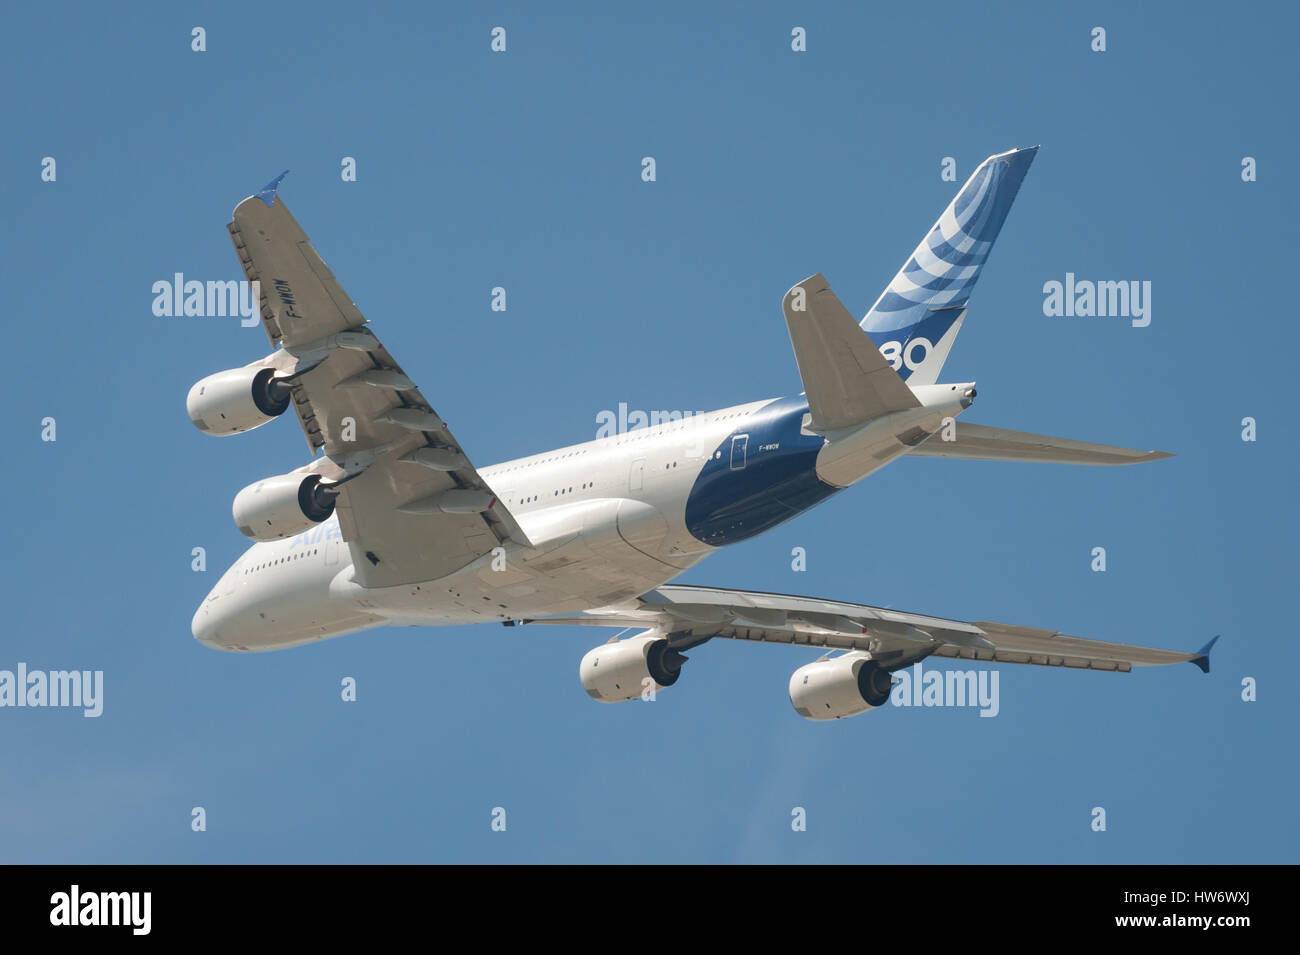 Closeup of an Airbus A380 super-jumbo jet airliner in flight over Farnborough, Hampshire, UK Stock Photo